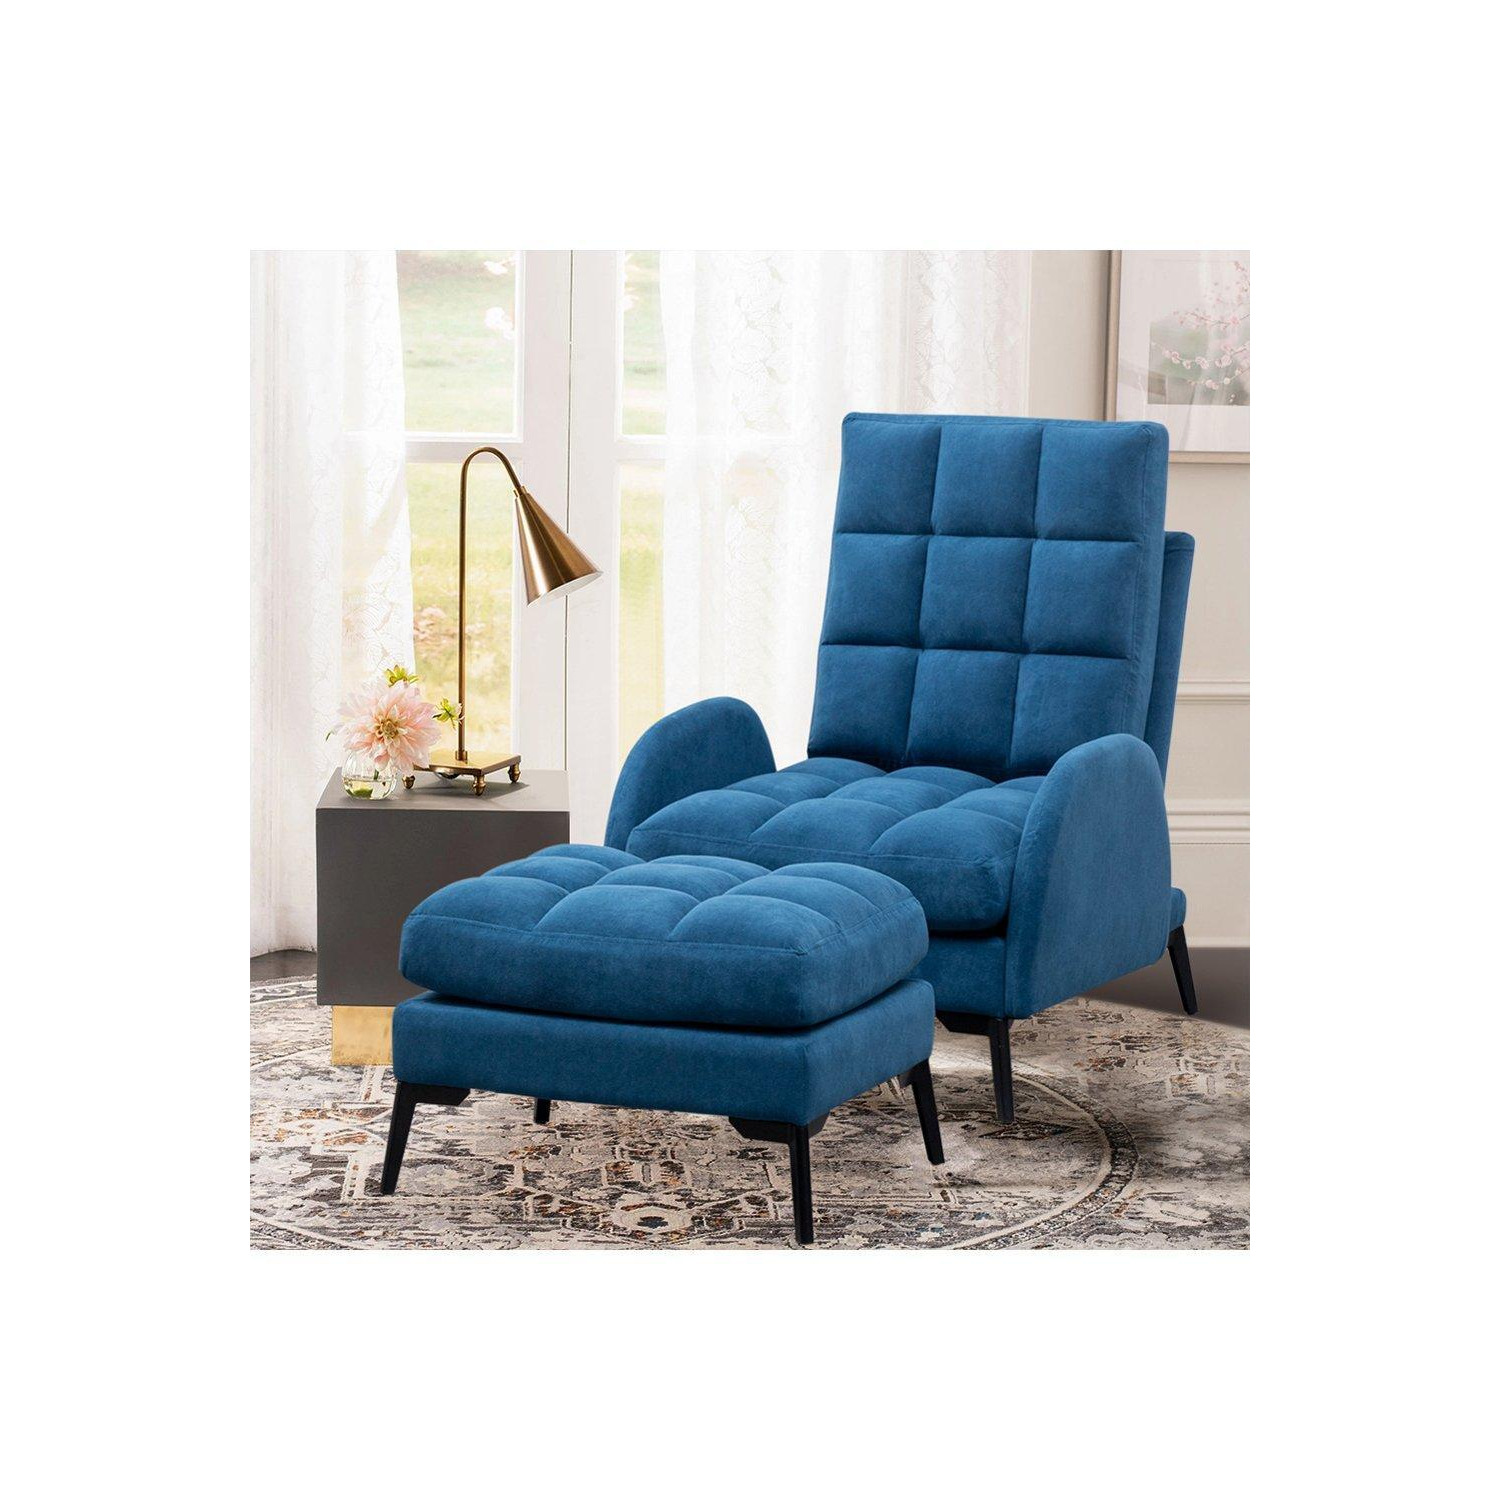 Modern Leisure Arm Chair with Footstool - image 1